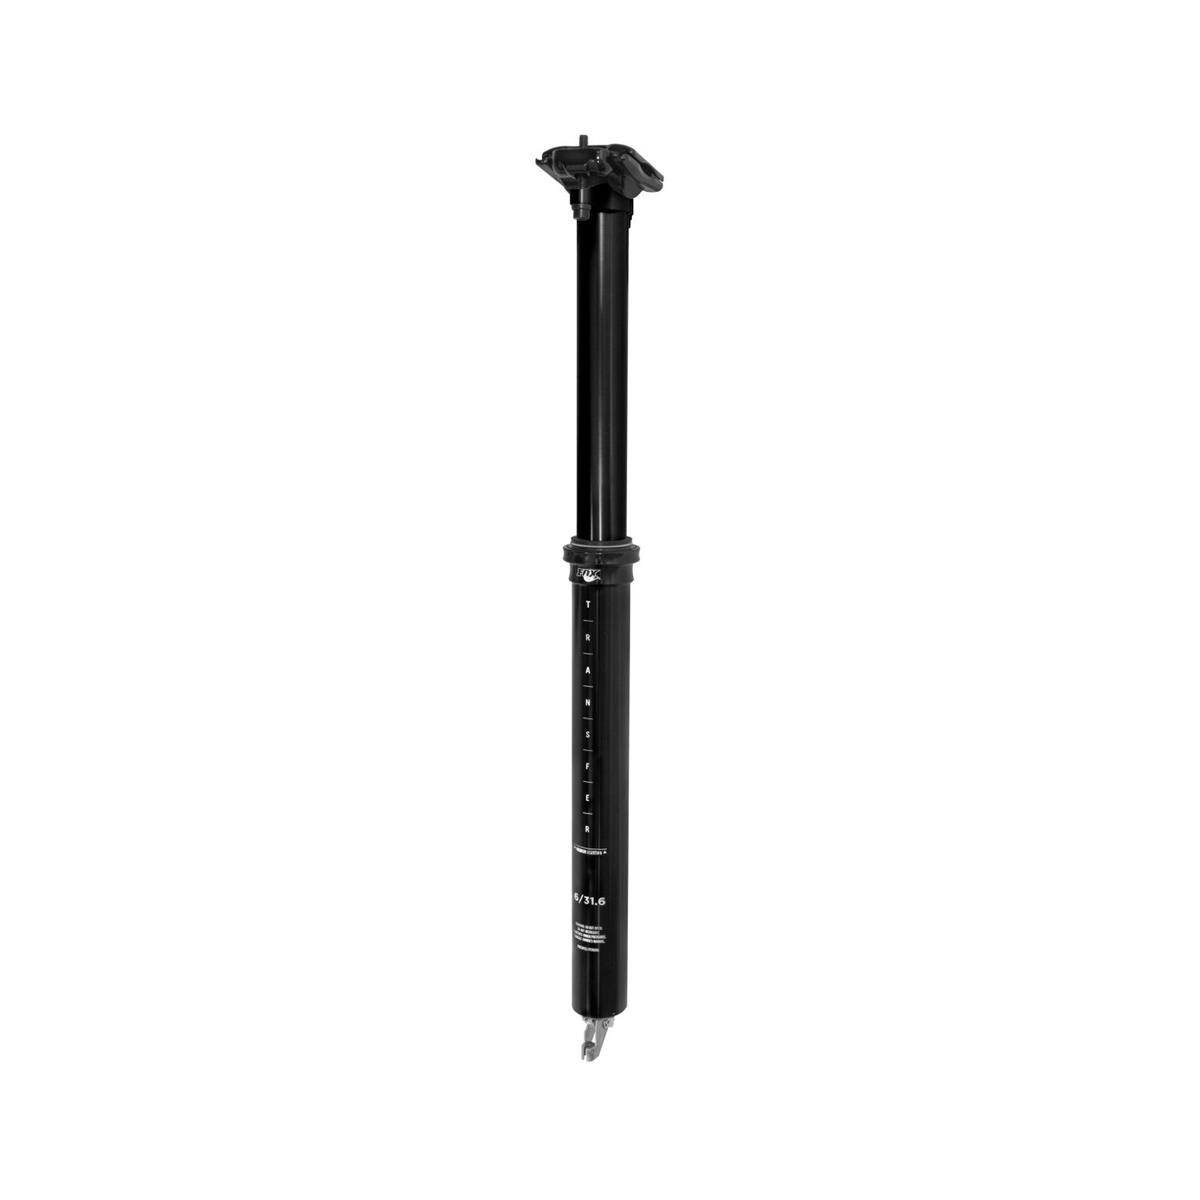 Fox Racing Shox Tige de Selle Transfer Performance Elite 2019 | 31.6 mm | Internal | Without Lever